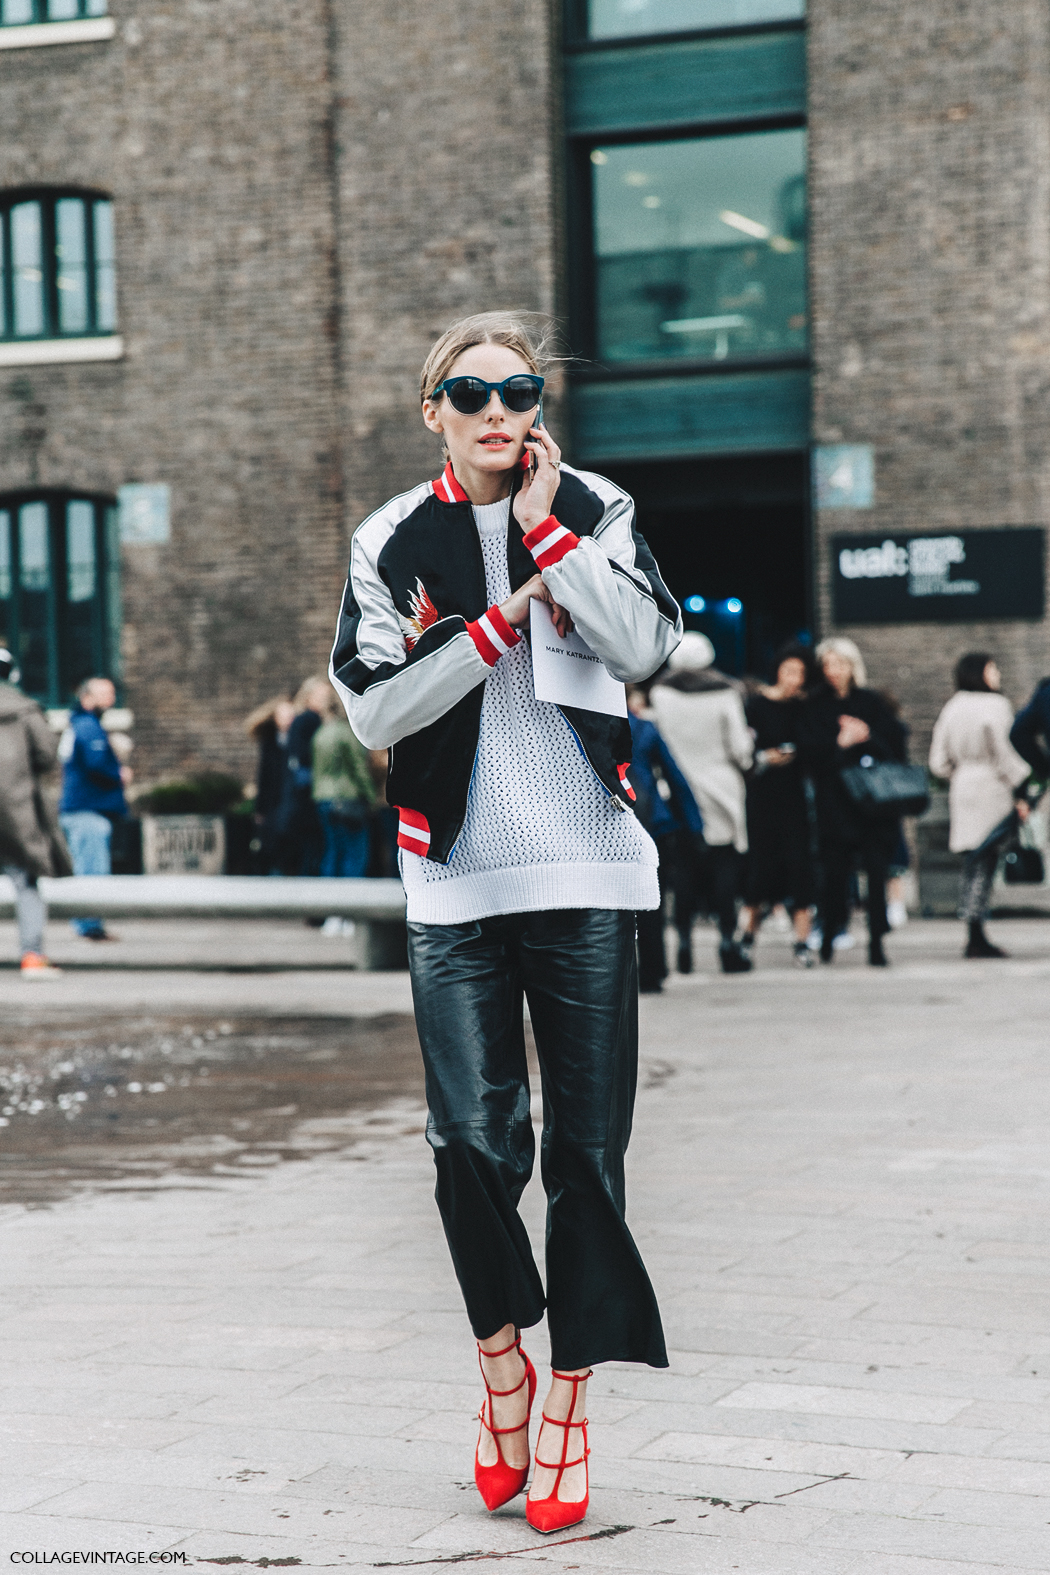 LFW-London_Fashion_Week_Fall_16-Street_Style-Collage_Vintage-Olivia_Palermo-Bomber_Jacket-Leather_Trousers-Red_Shoes-4